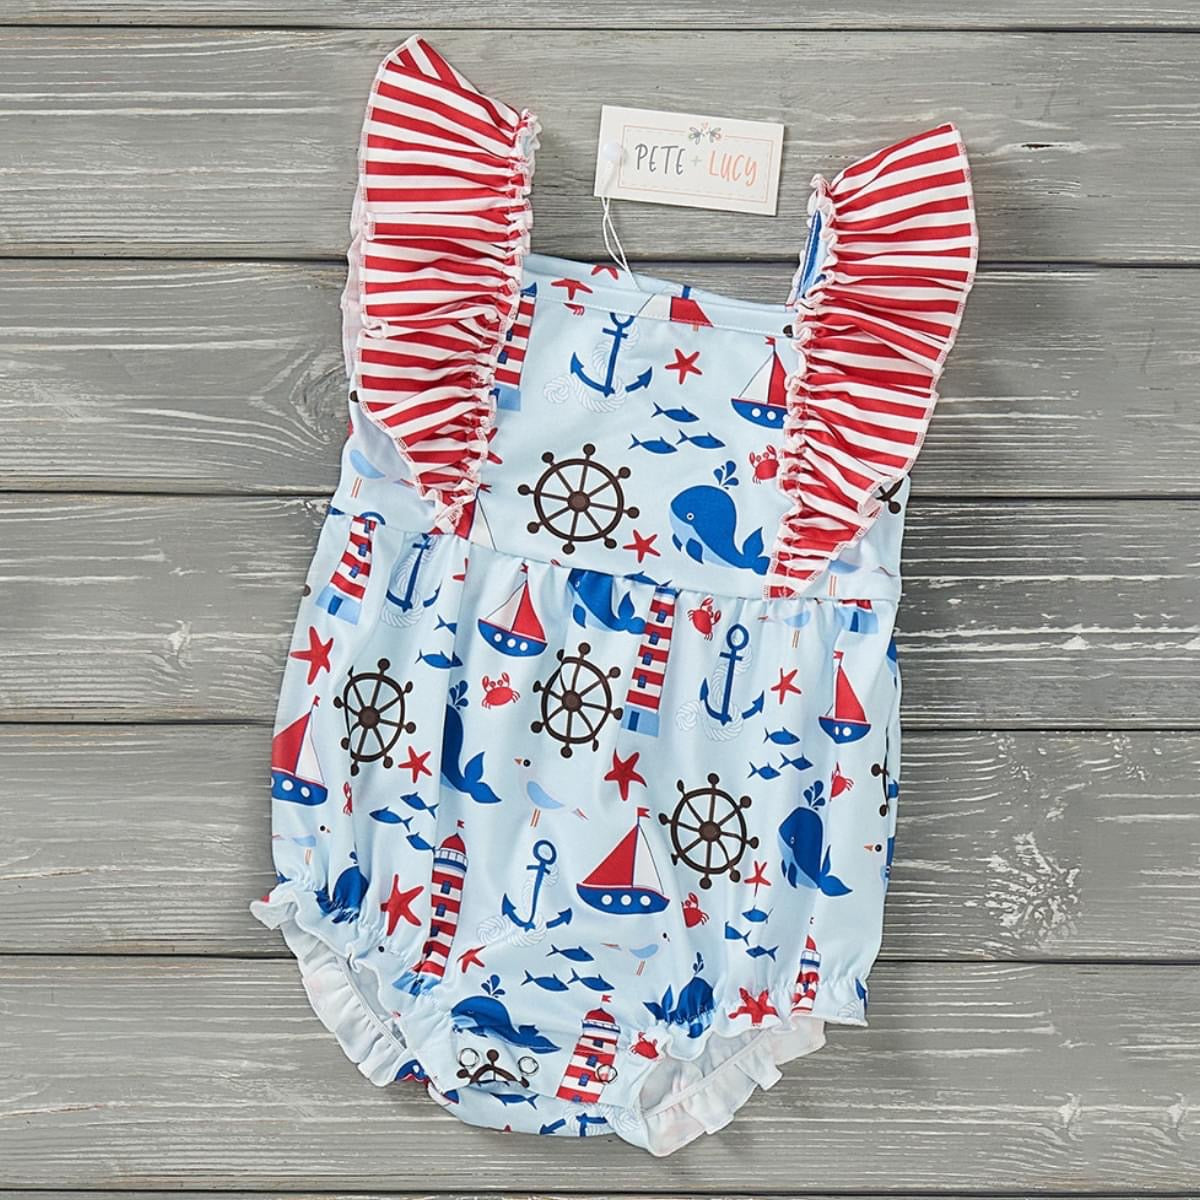 (Preorder) Anchors Away Infant Romper by Pete + Lucy